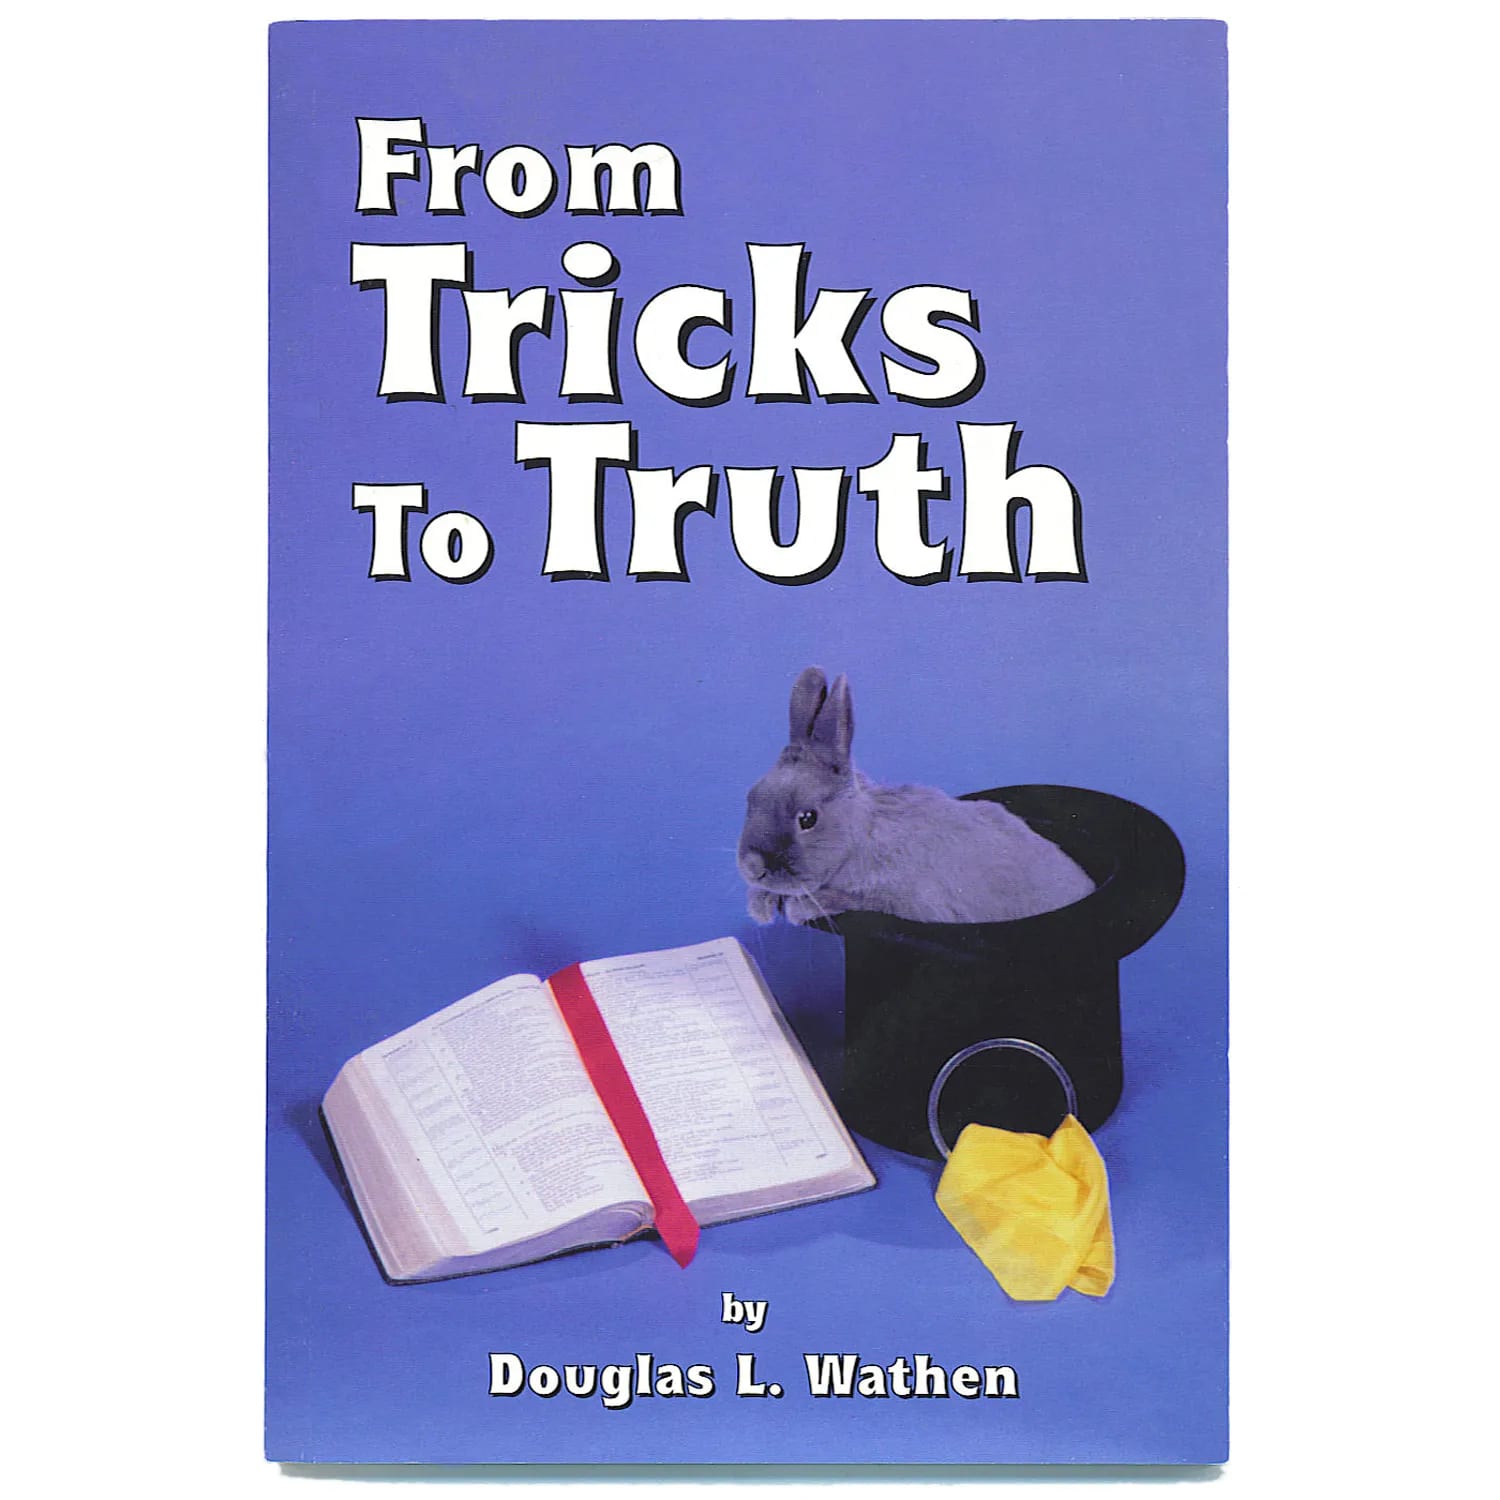 From Tricks To Truth